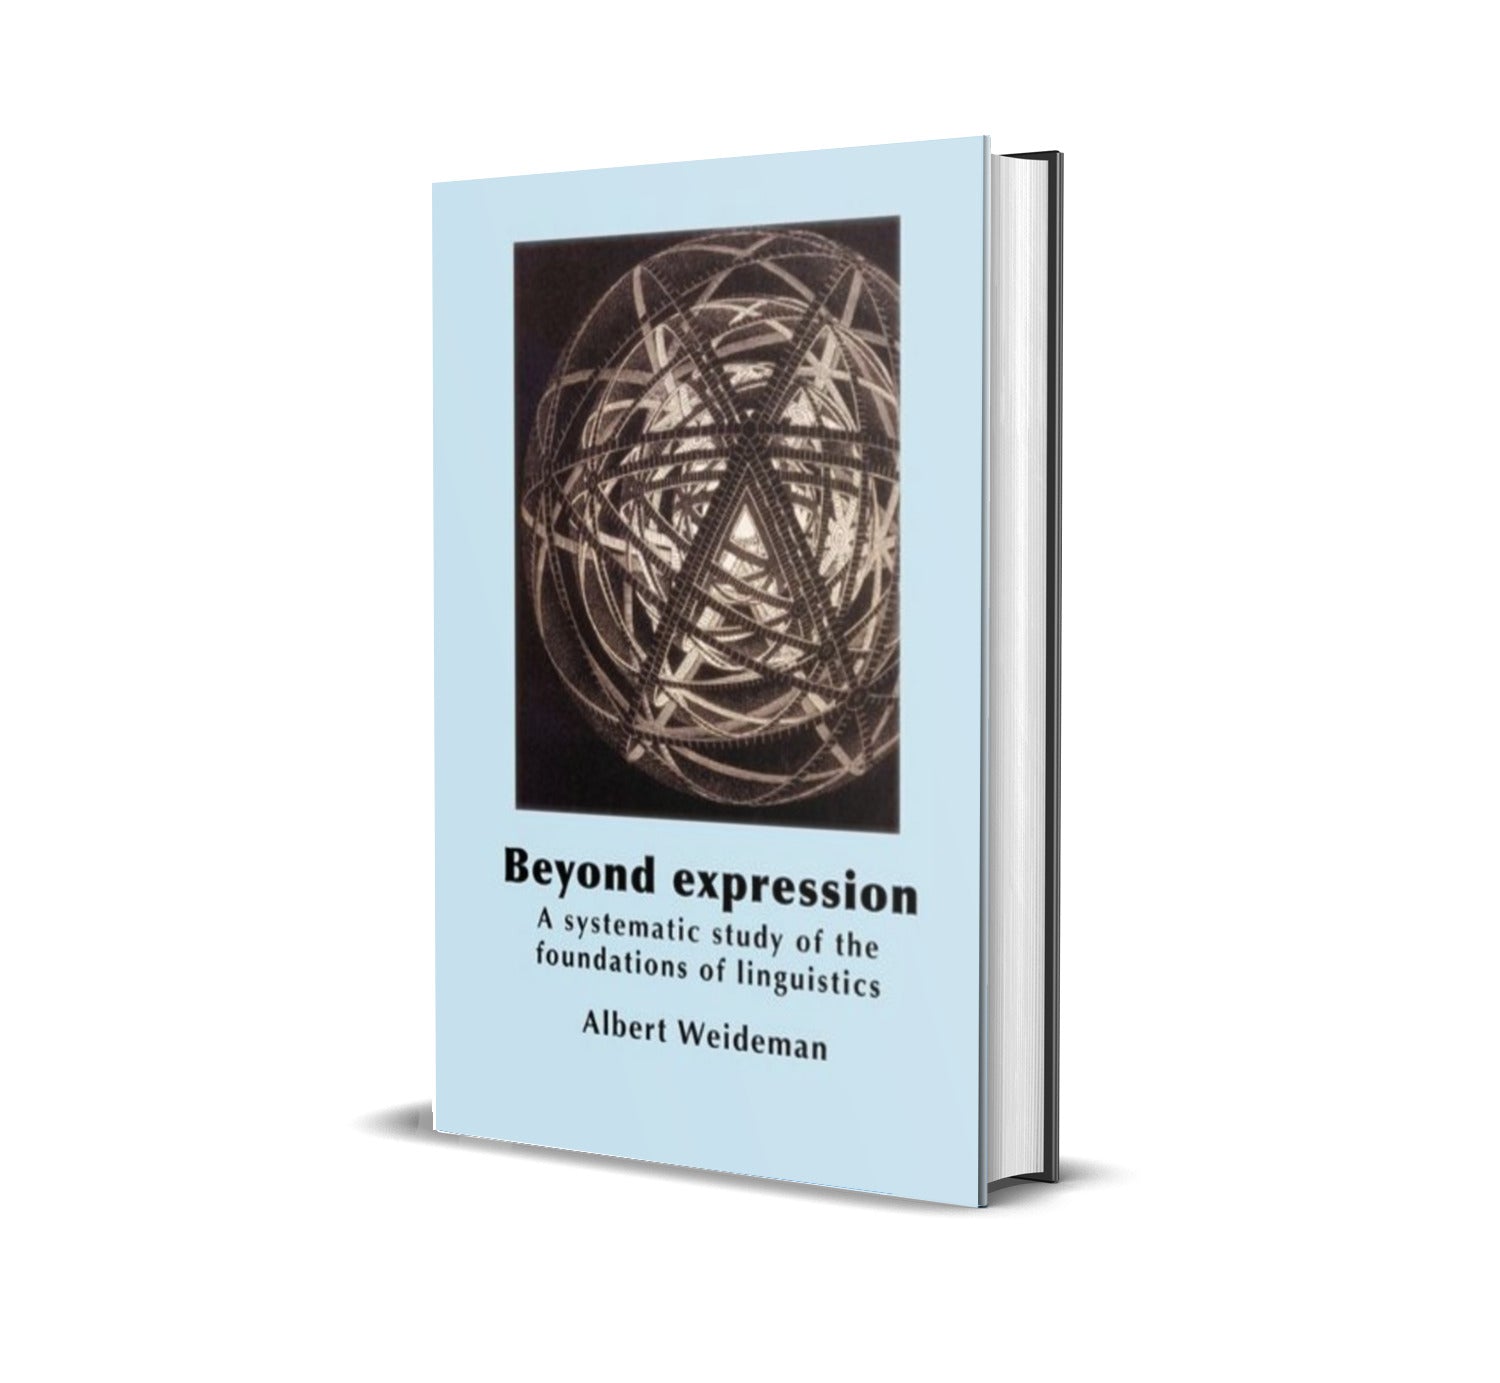 Beyond Expression: A Systematic Study of the Foundations of Linguistics